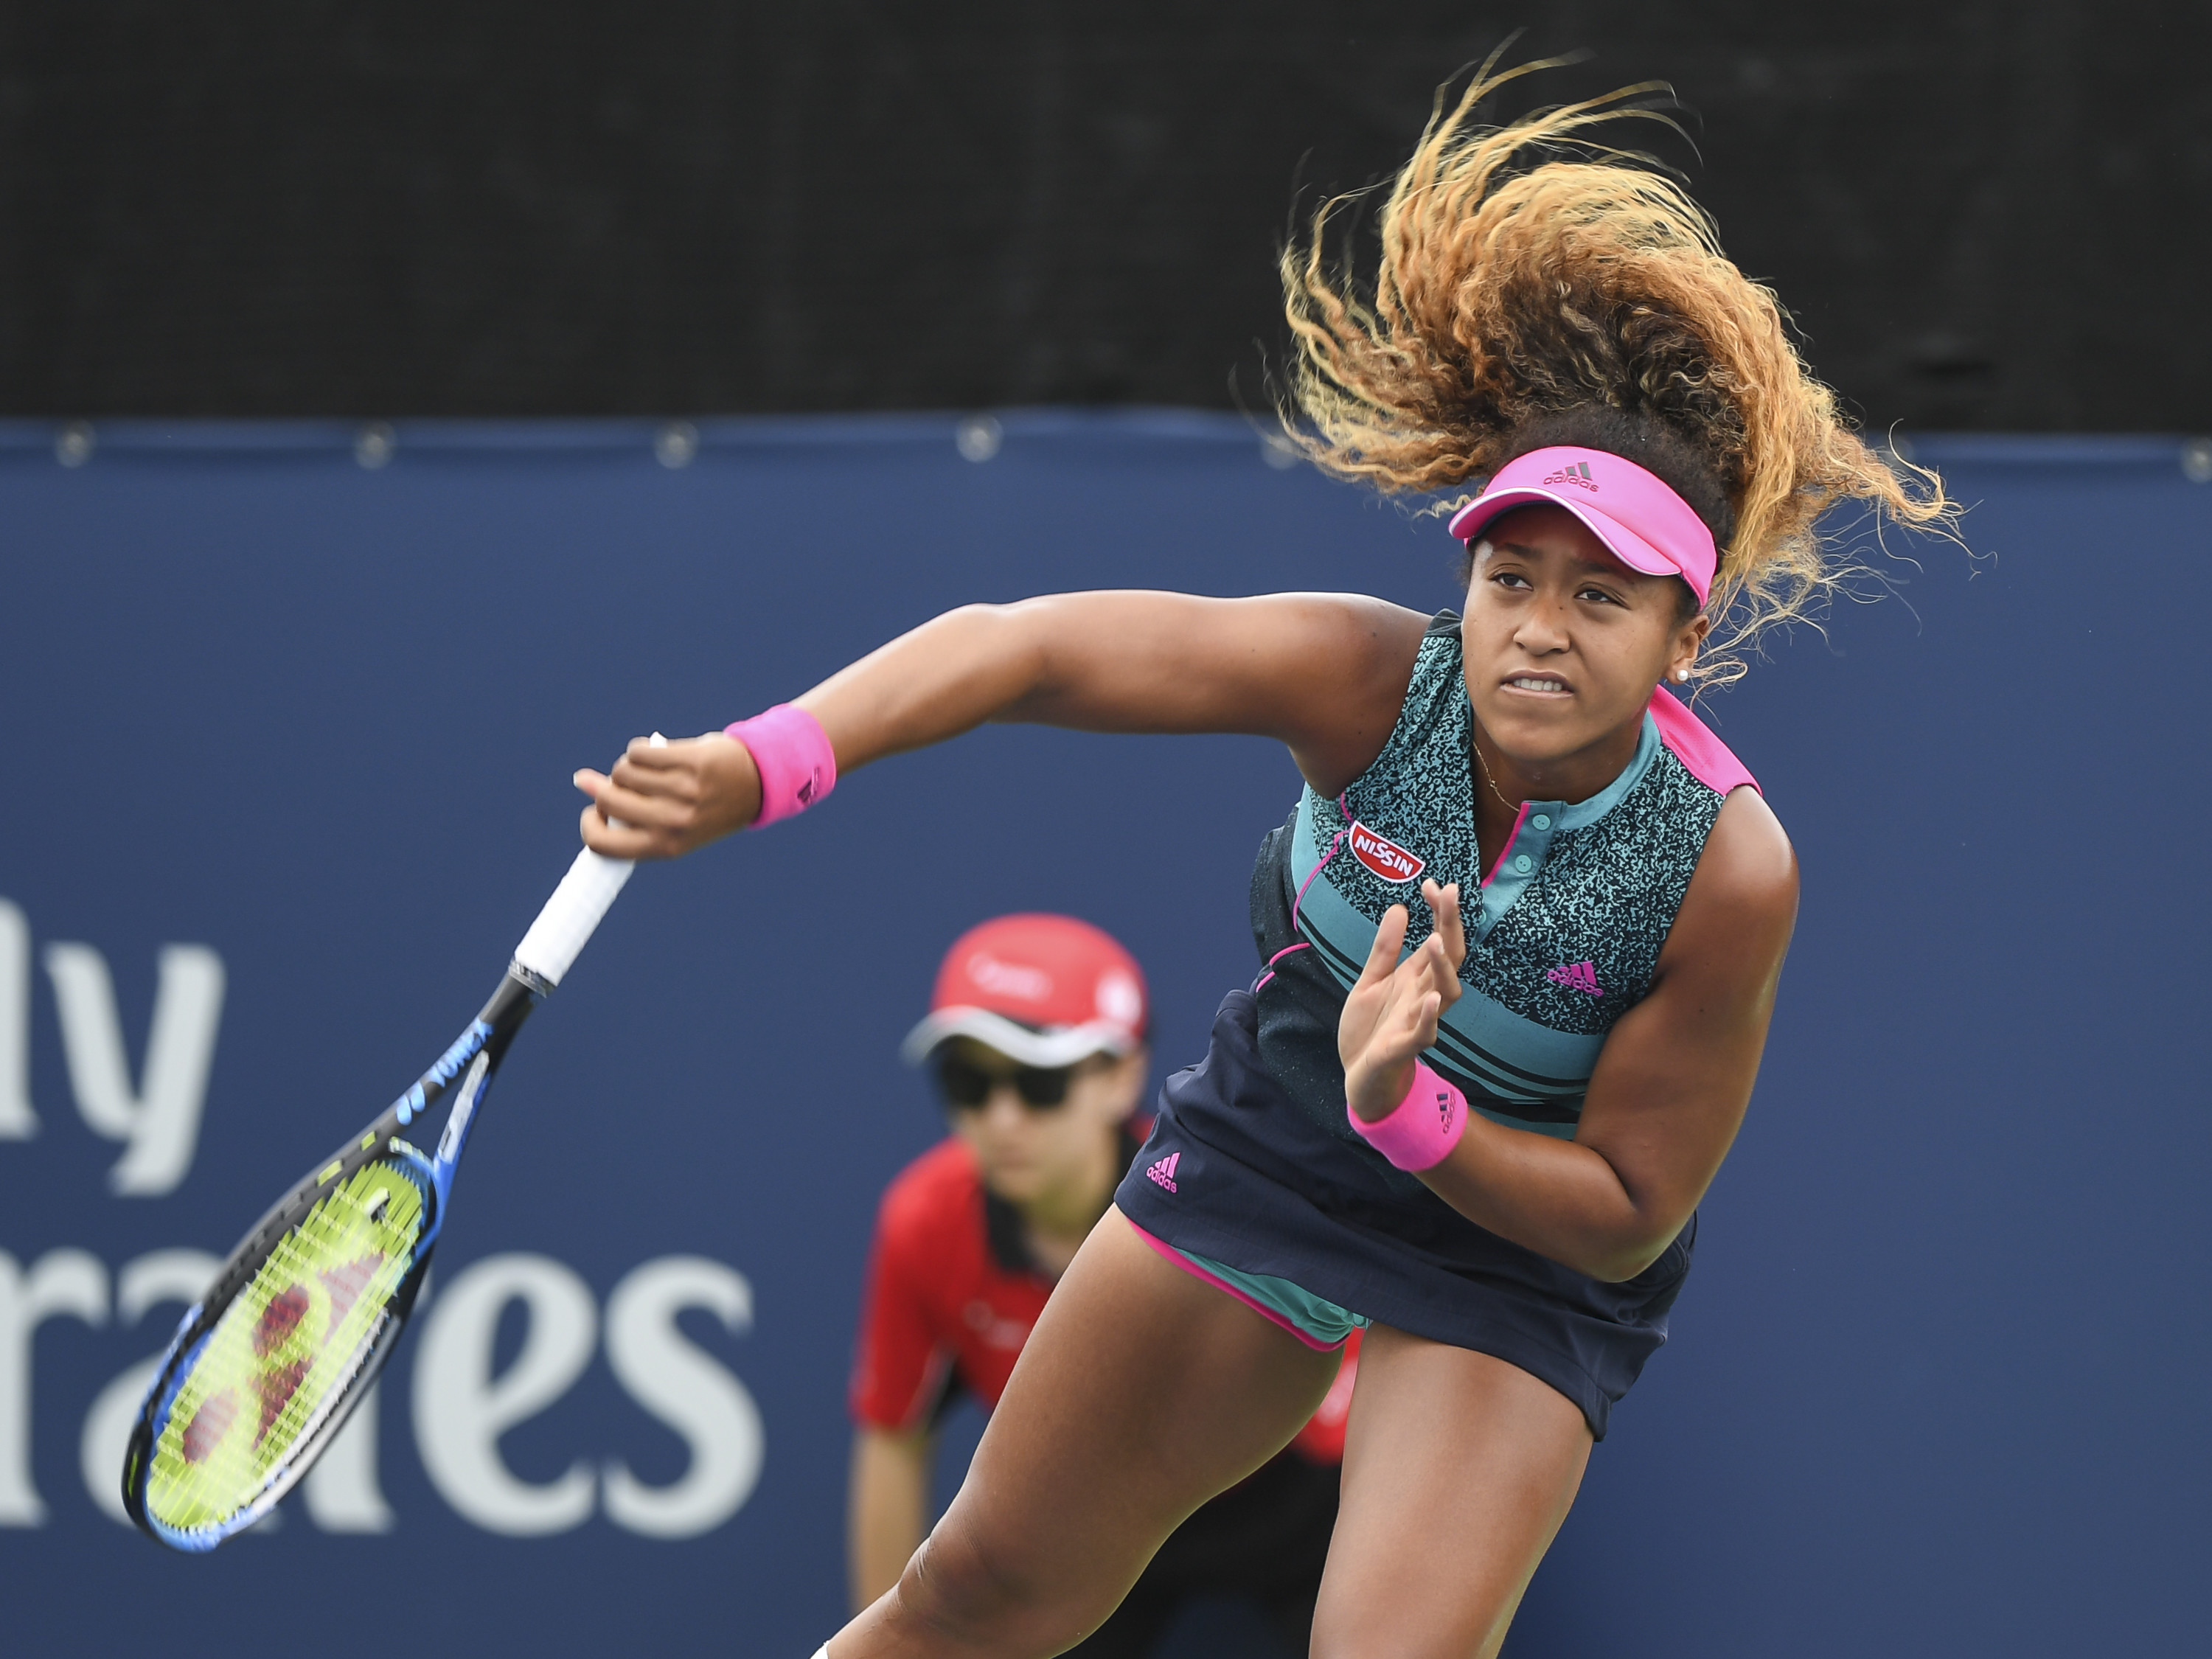 Naomi Osaka of Japan serves during day two of the Rogers Cup at IGA Stadium on Aug. 7, 2018 in Montreal, Quebec. (Minas Panagiotakis—Getty Images)